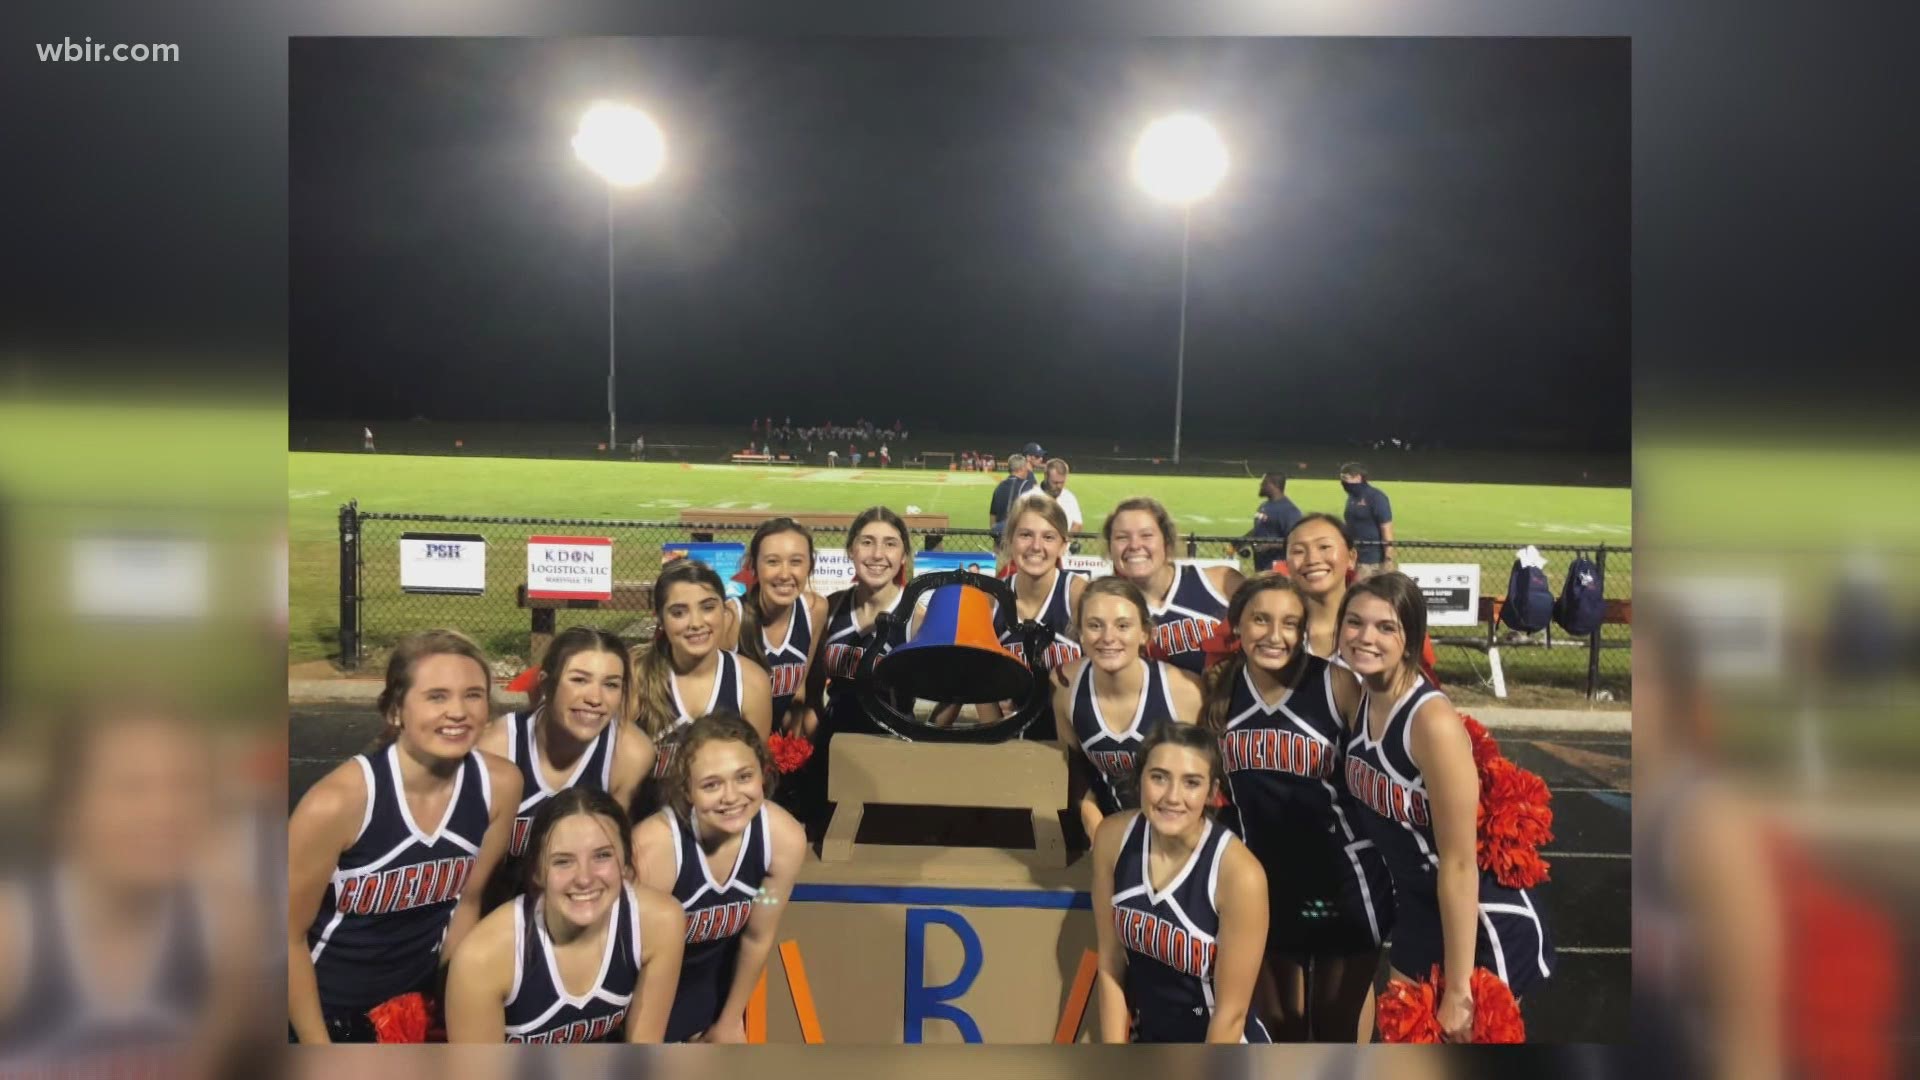 Governor Bill Lee extended an Executive Order this week that prohibits cheerleaders, pep bands and dancers from attending certain high school events.